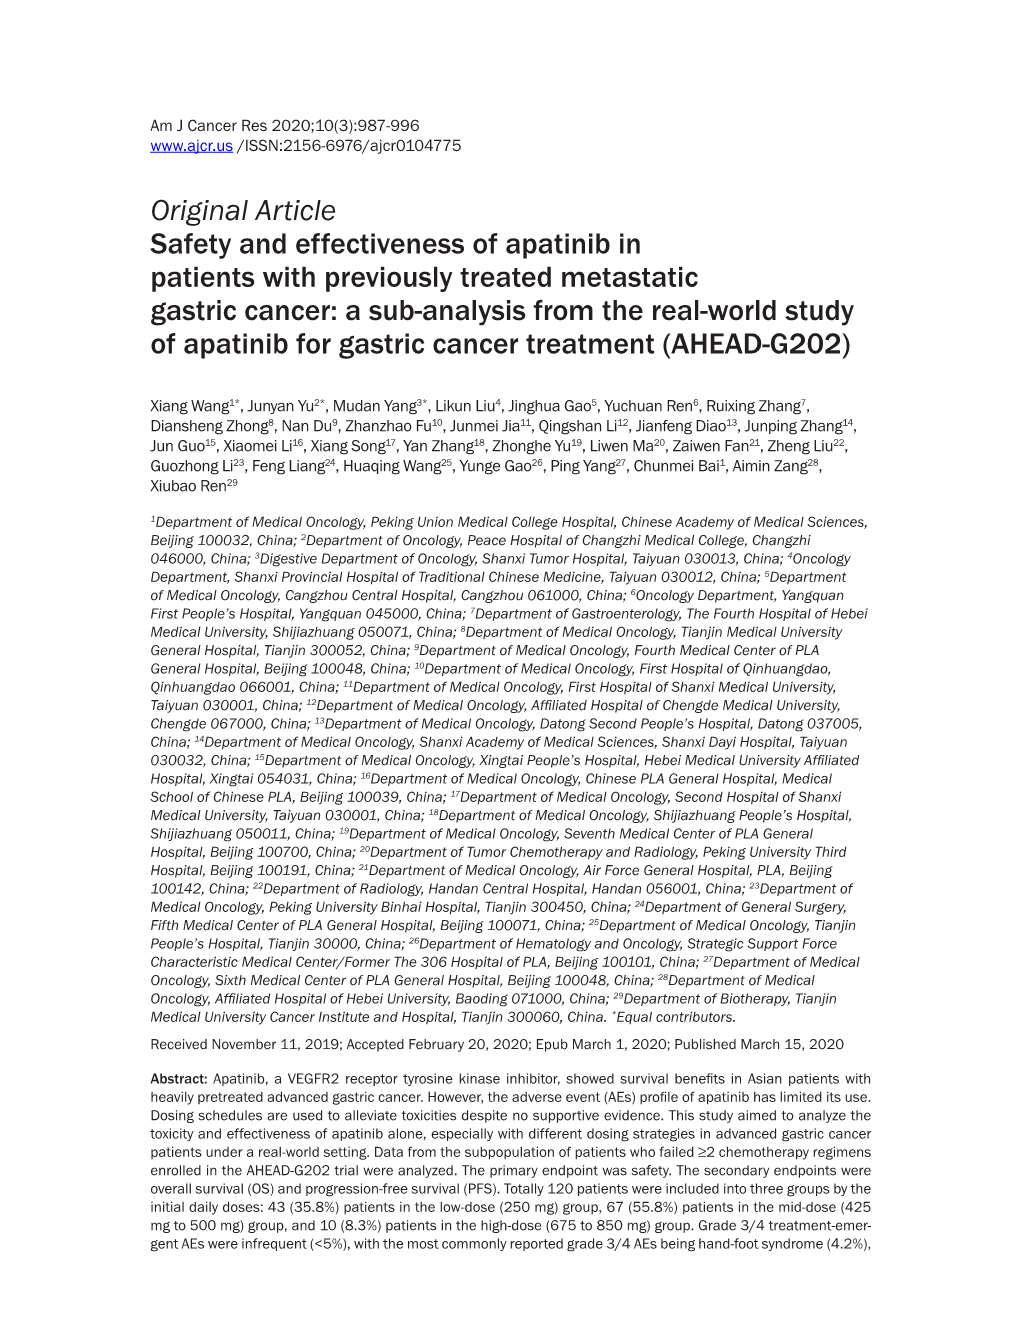 Original Article Safety and Effectiveness of Apatinib in Patients with Previously Treated Metastatic Gastric Cancer: a Sub-Ana